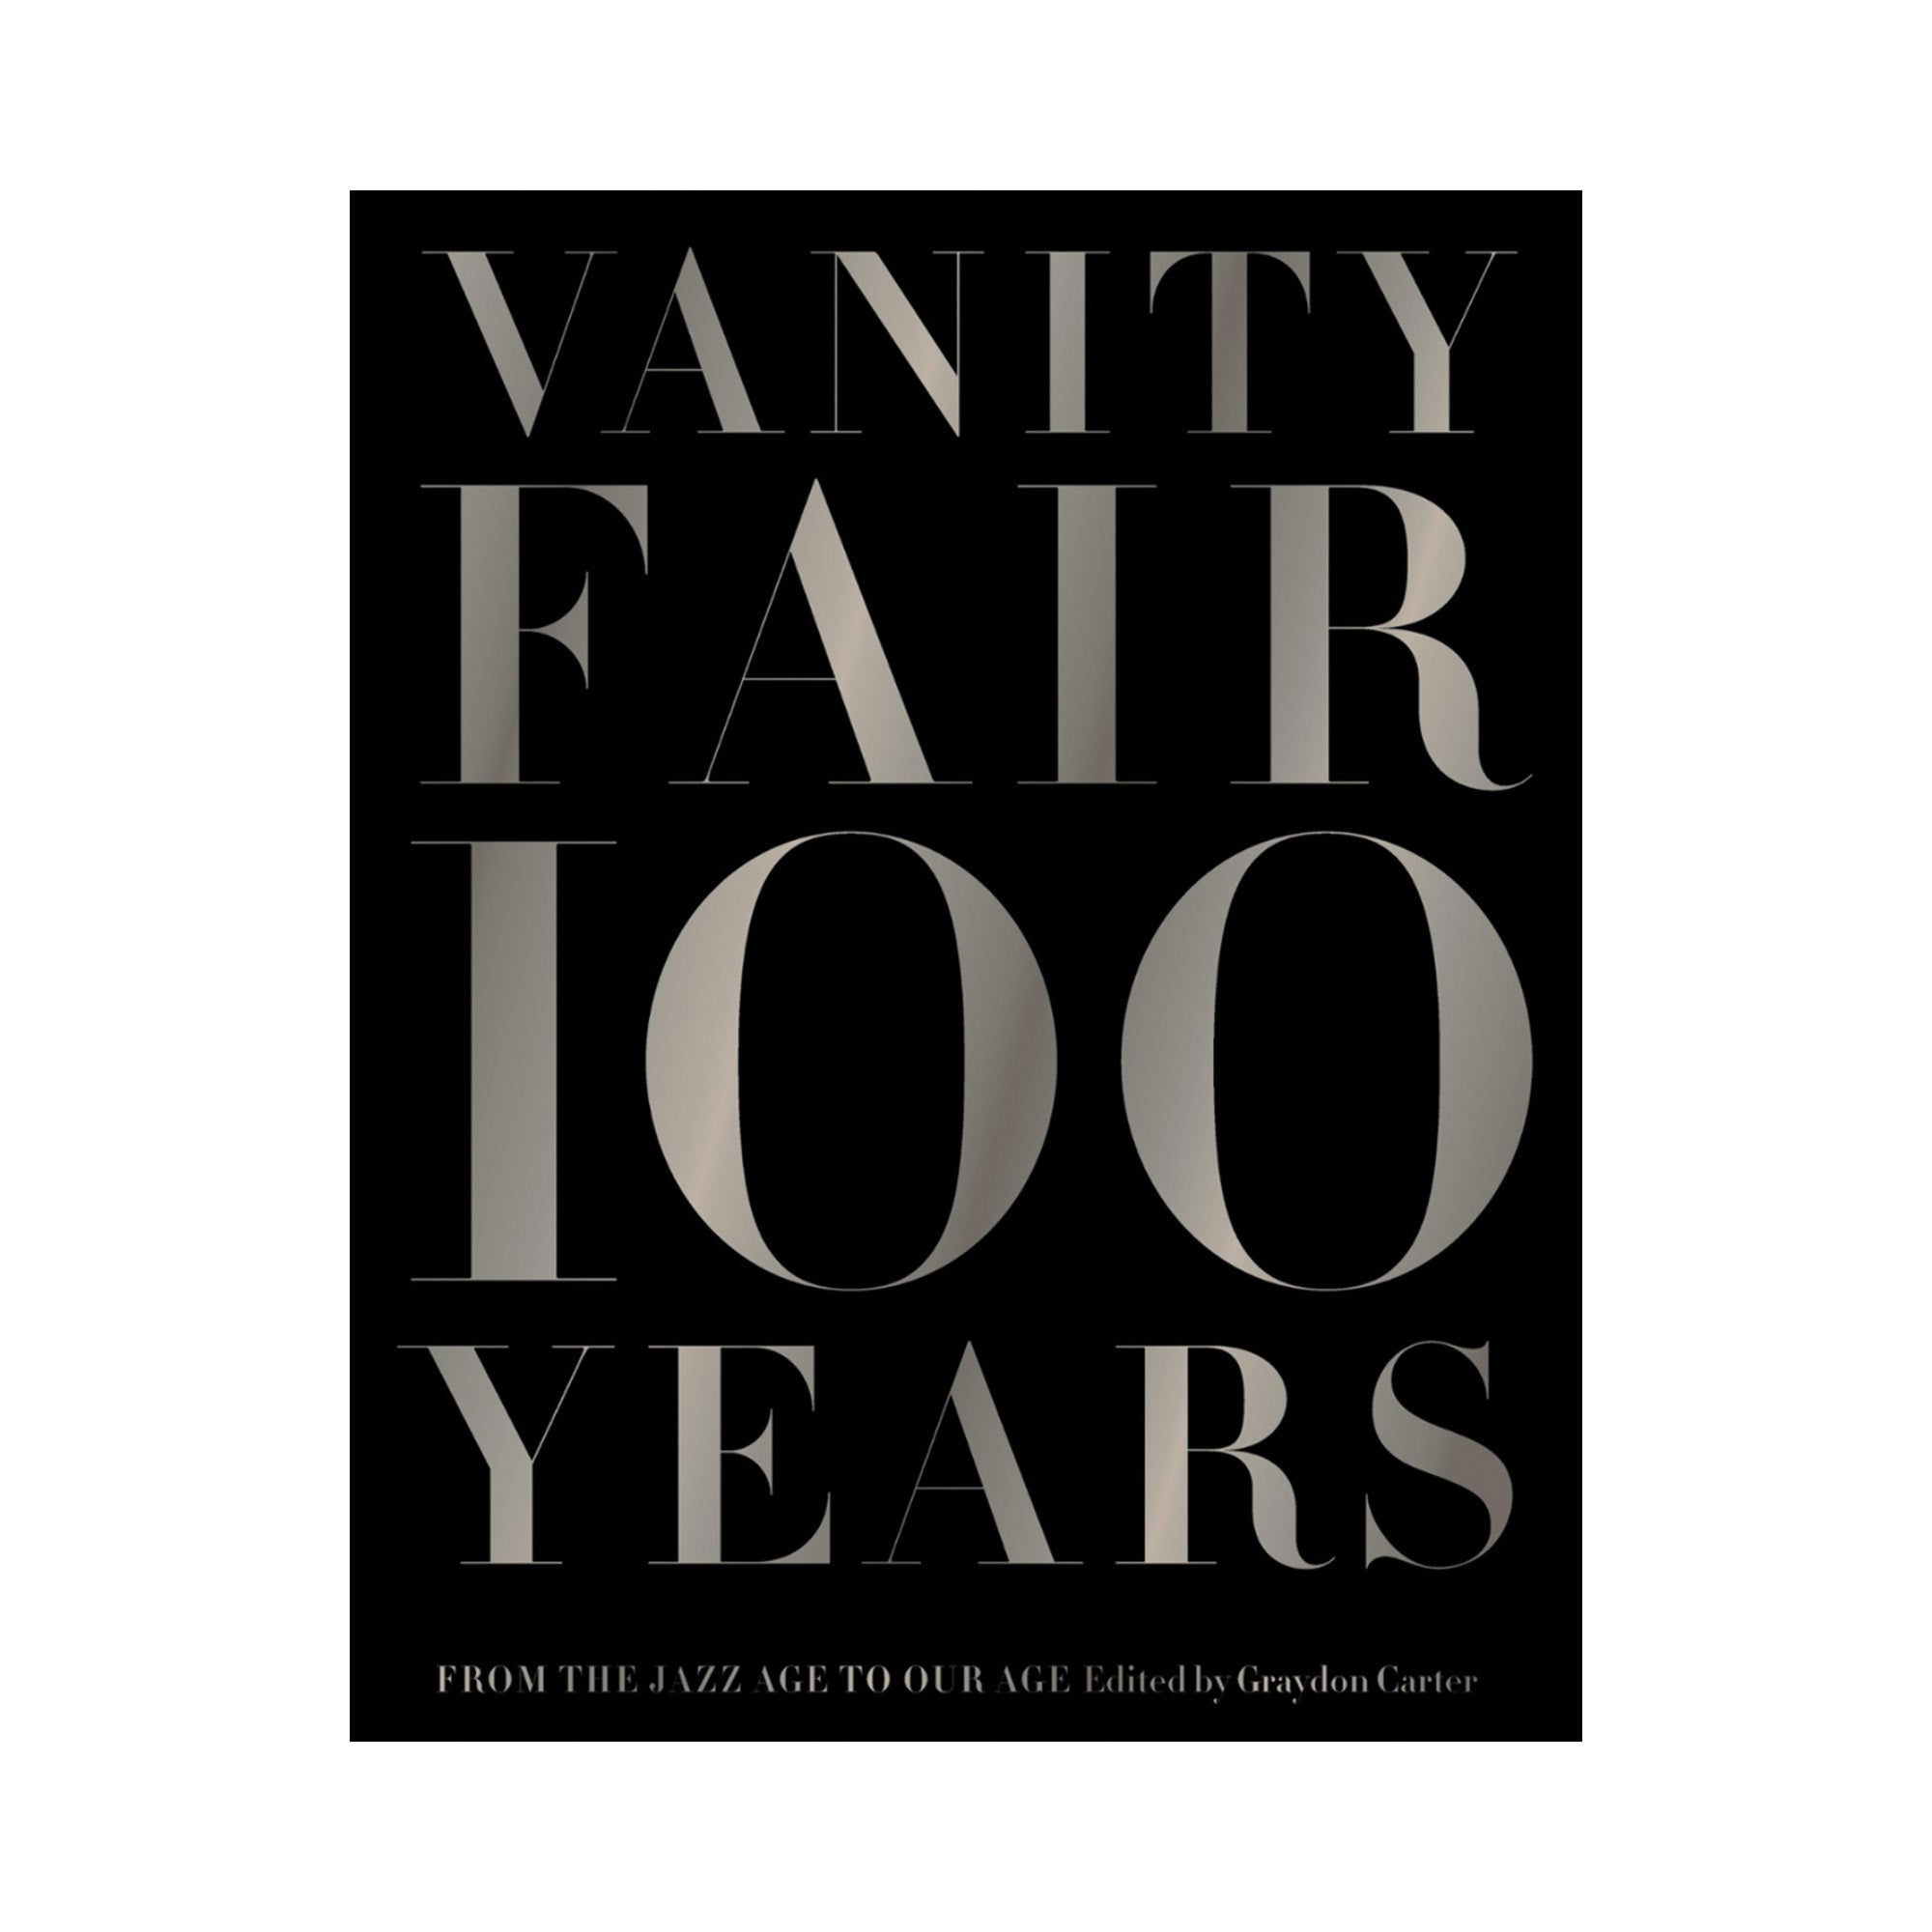 Vanity Fair 100 Years: From the Jazz Age to Our Age - Hardcover